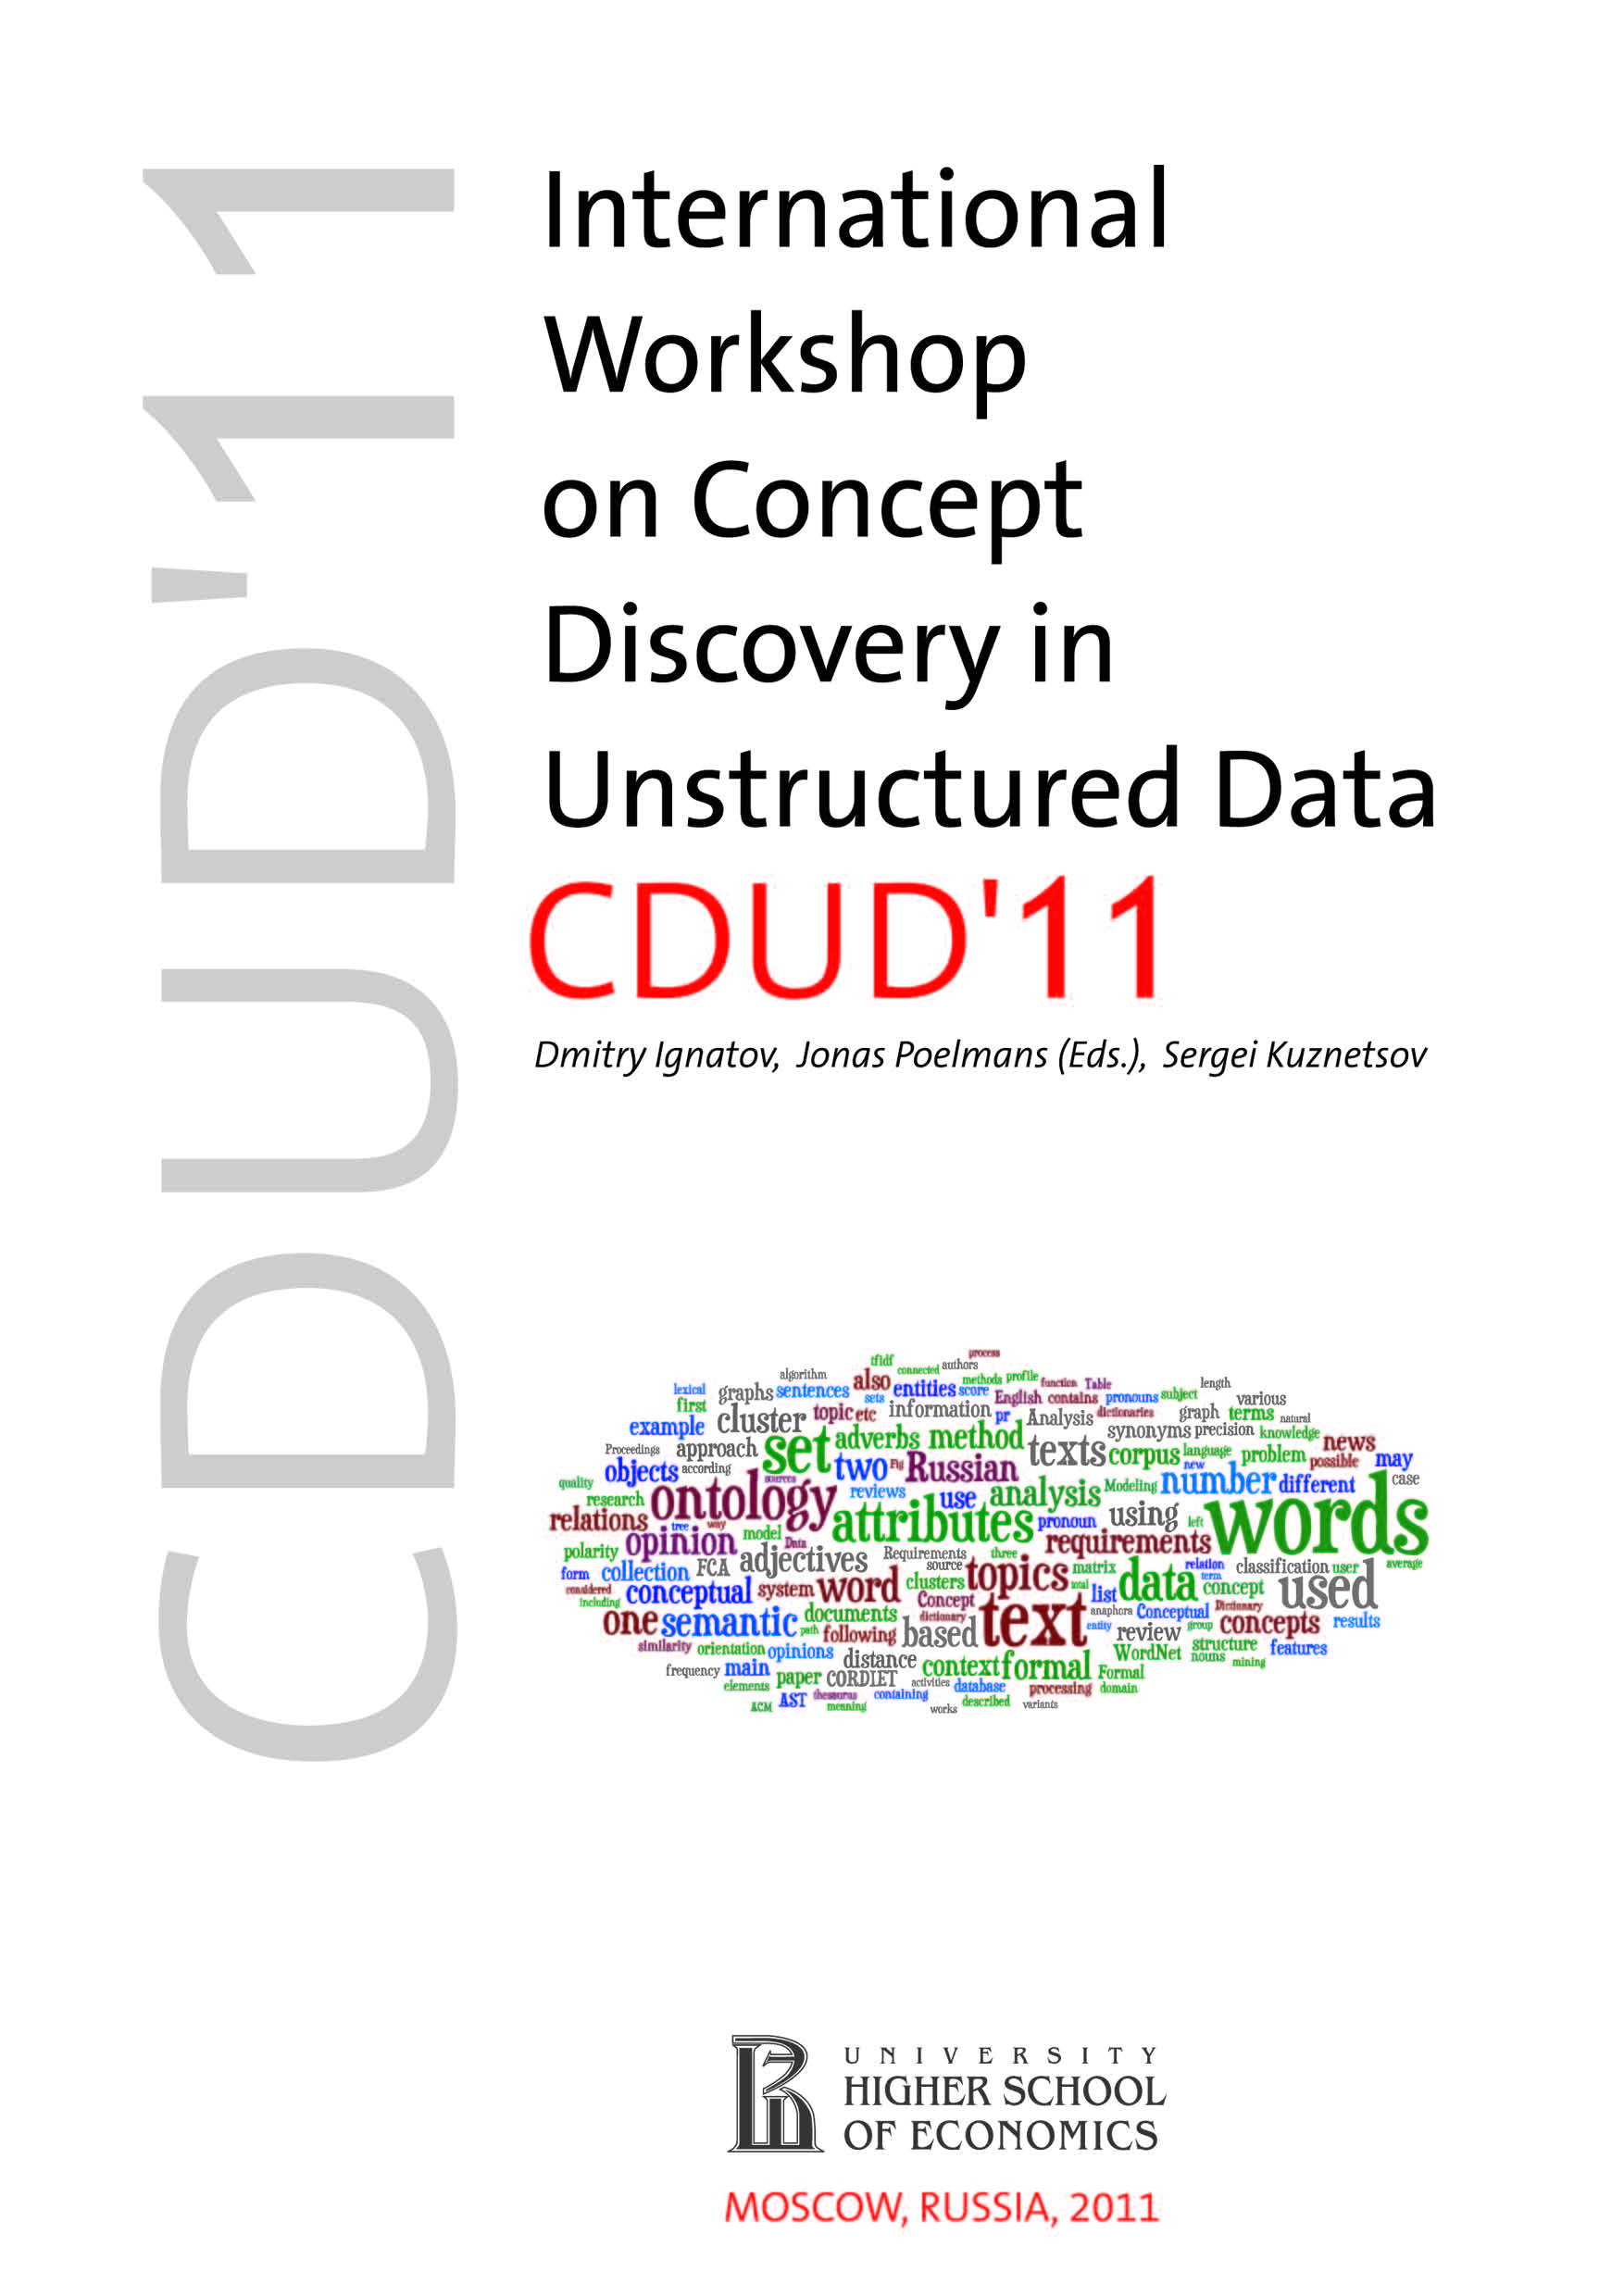 CDUD'11 – Concept Discovery in Unstructured Data Workshop co-located with the 13th International Conference on Rough Sets, Fuzzy Sets, Data Mining, and Granular Computing (RSFDGrC-2011), June 2011, Moscow, Russia